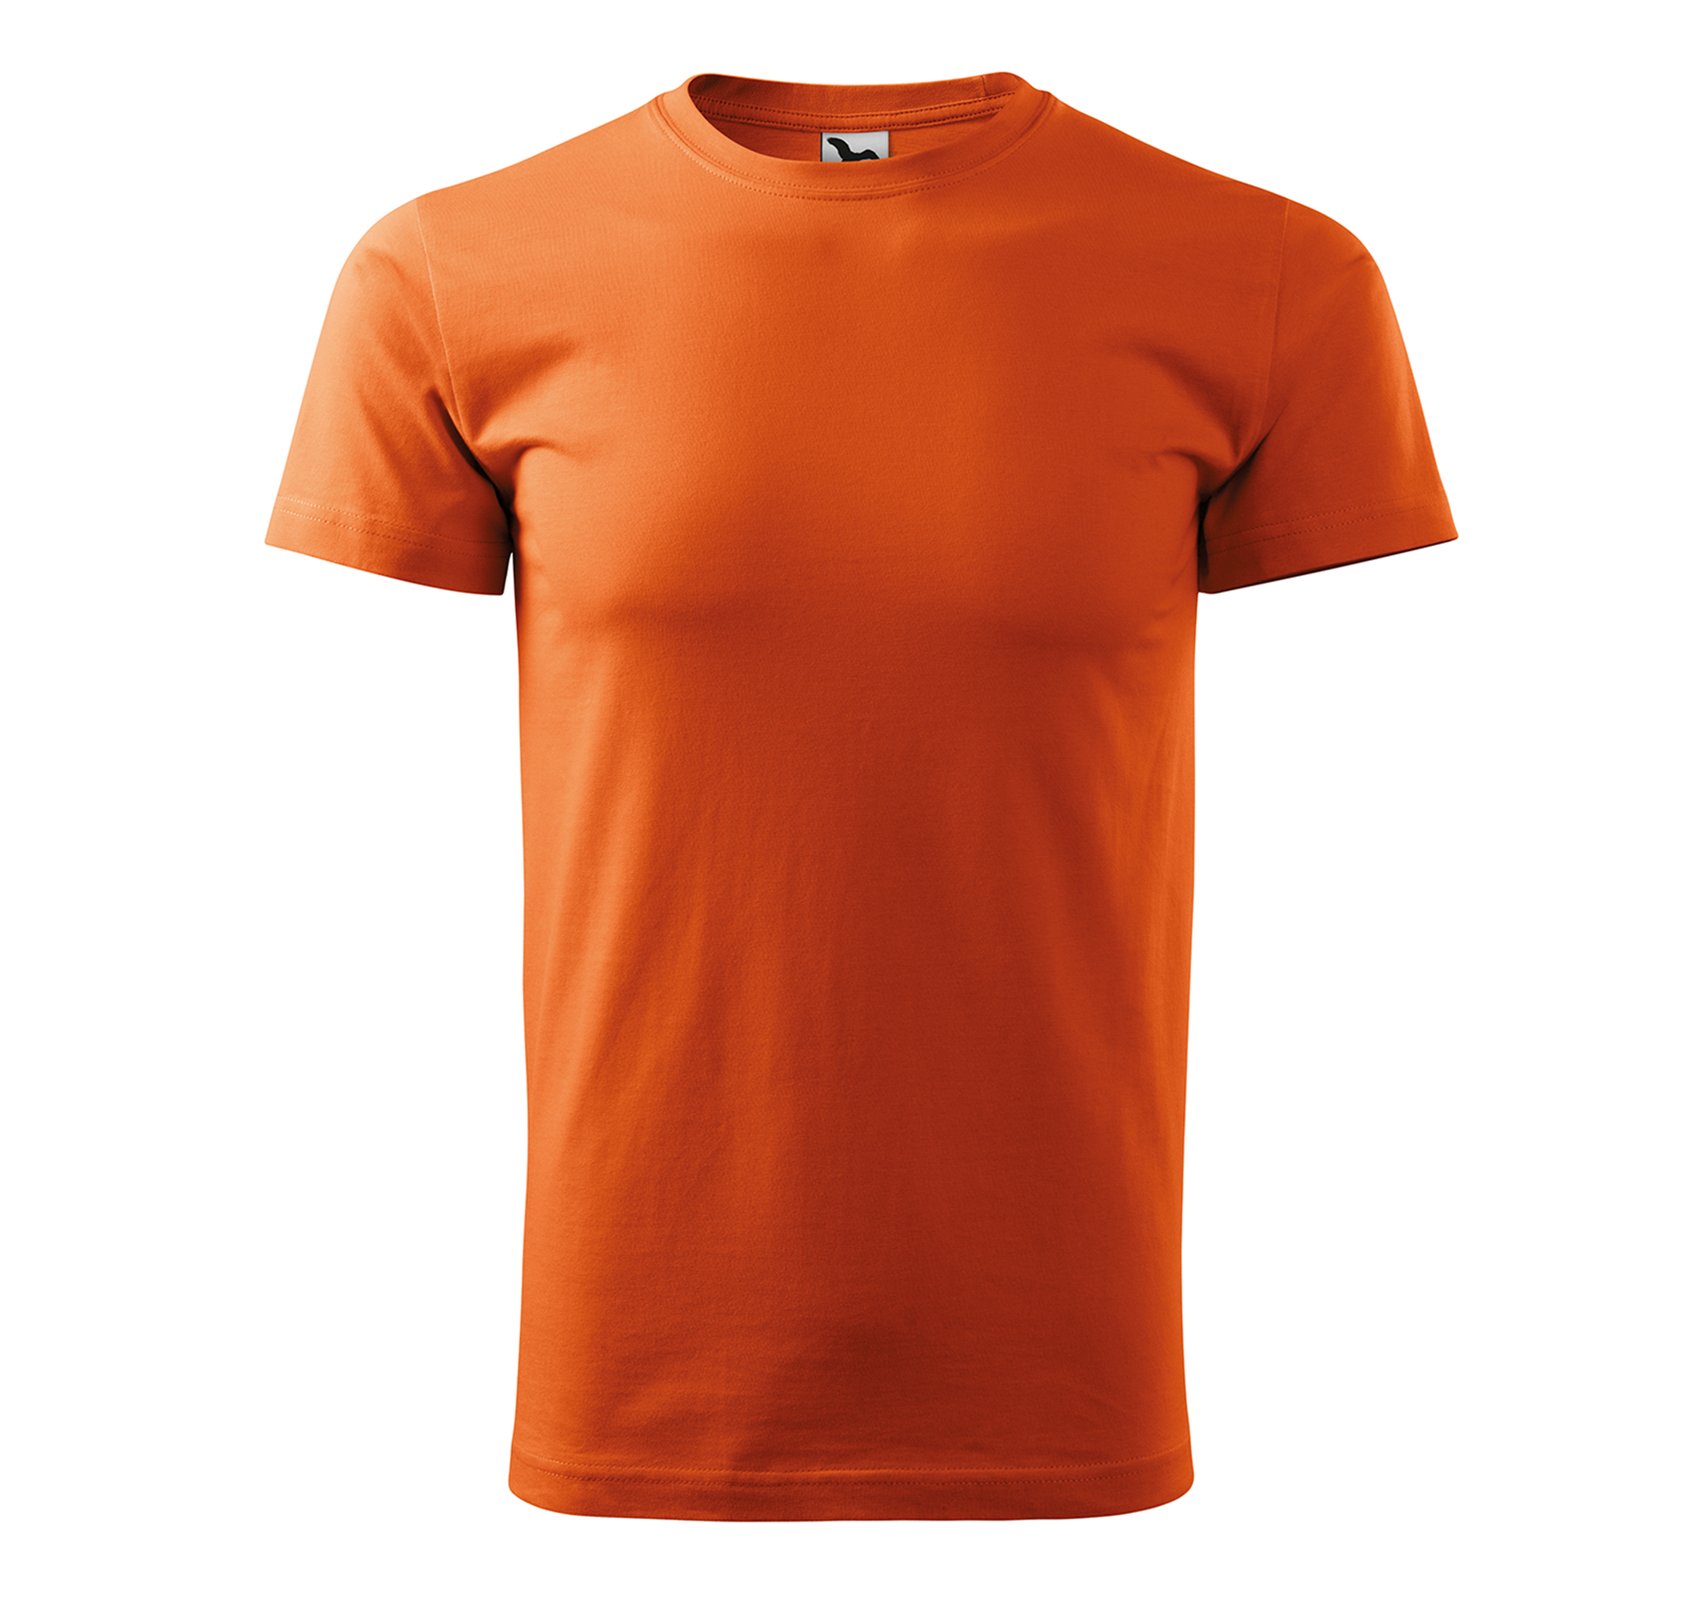 BASIC 160 T-shirt with your LOGO